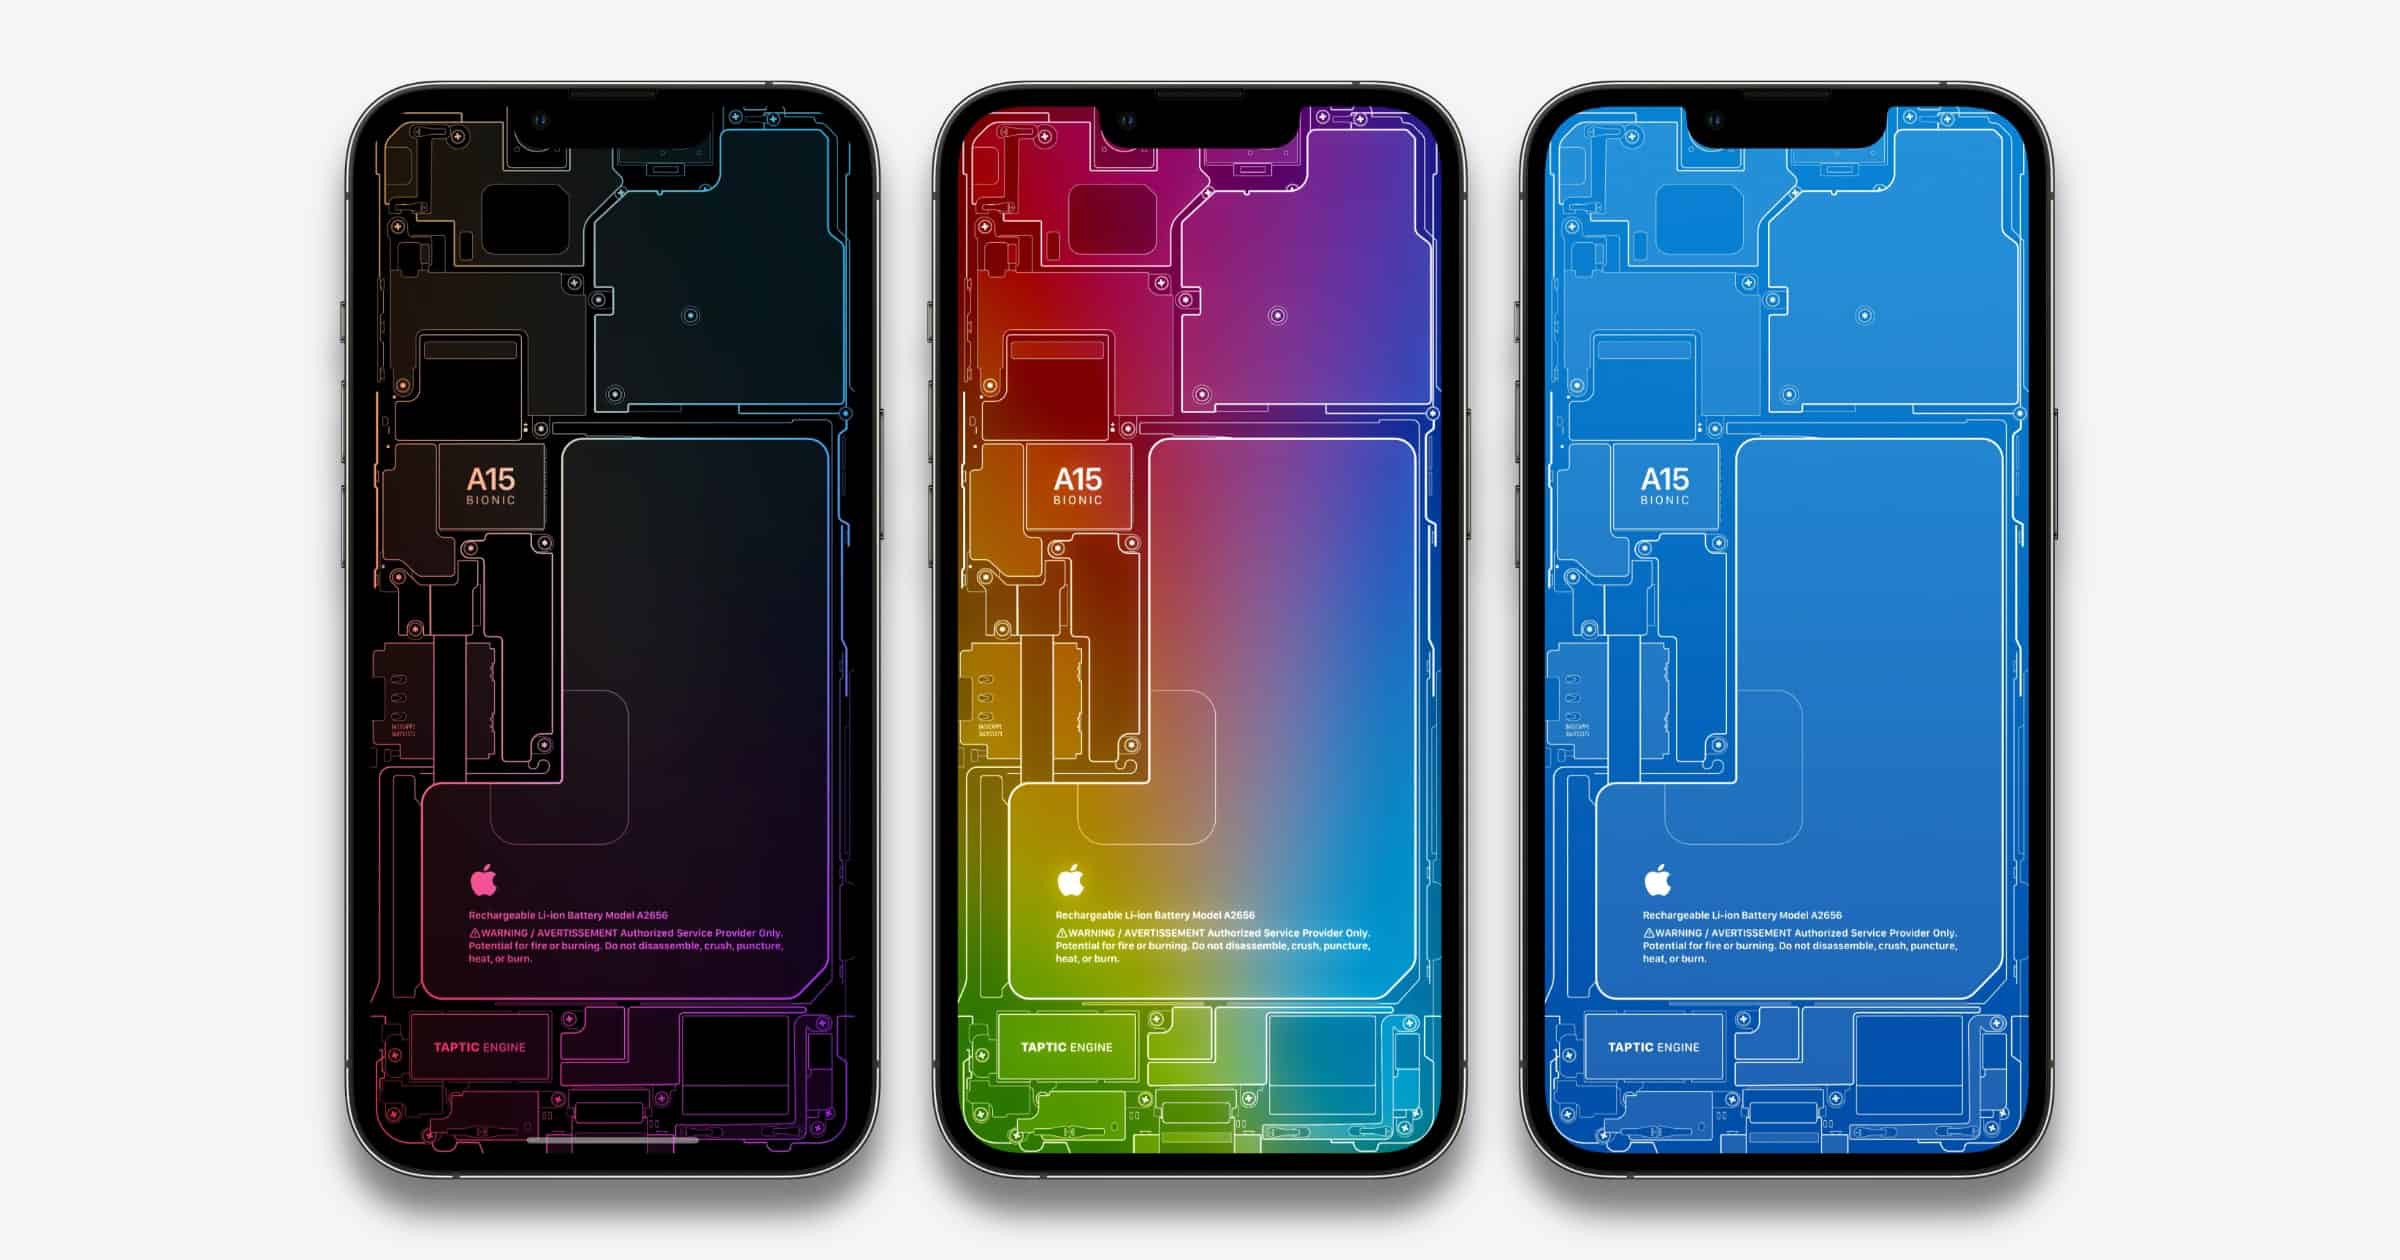 Check Out These Colorful X-Ray Wallpapers for Your iPhone - The Mac Observer